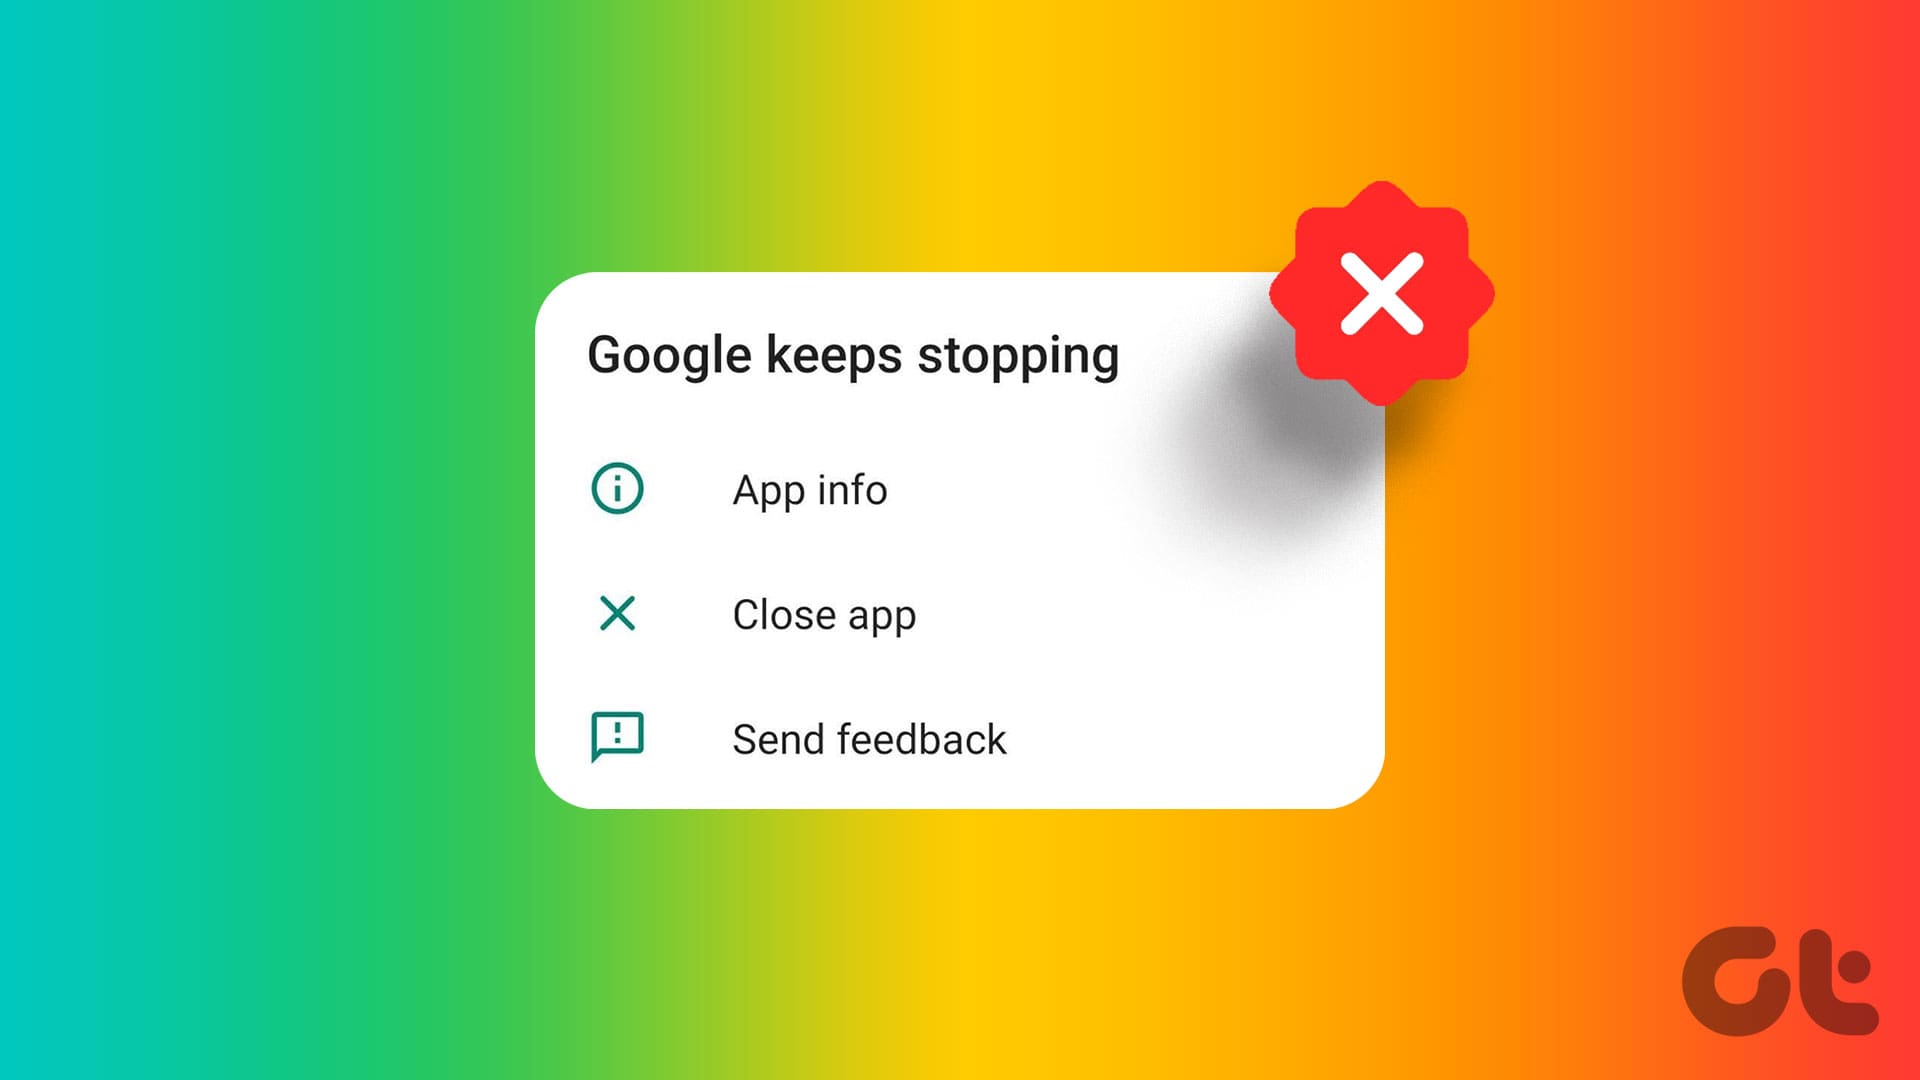 How to Fix Google Keeps Stopping Error on Android